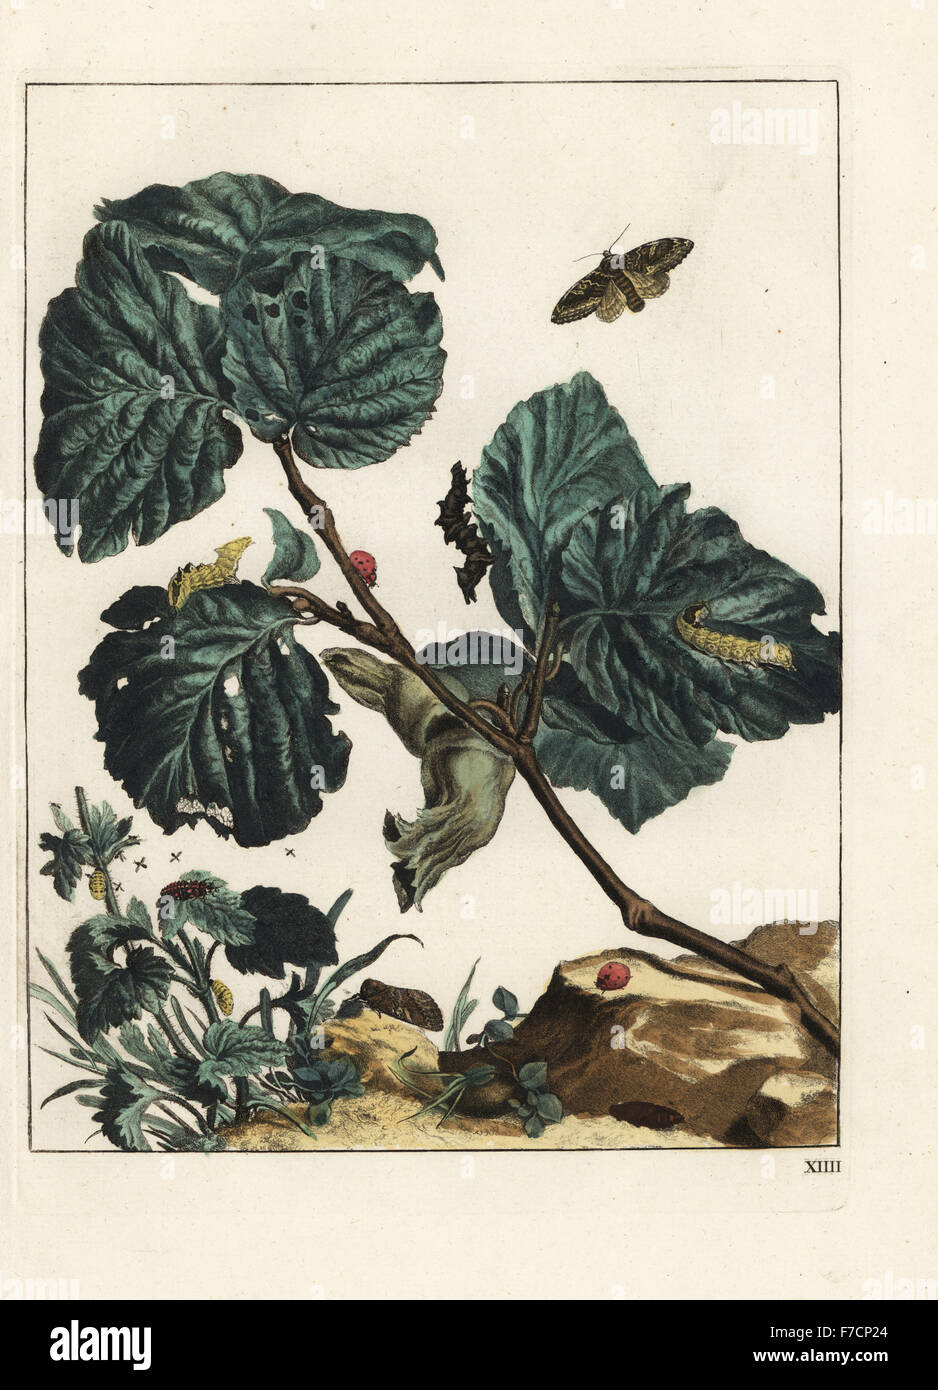 Tawny prominent, Harpyia milhauseri, seven-spot ladybird, Coccinella septempunctata and fruit flies on a hazel tree, Corylus avellana. Handcoloured copperplate engraving drawn and etched by Jacob l'Admiral in Naauwkeurige Waarneemingen omtrent de veranderingen van veele Insekten (Accurate Descriptions of the Metamorphoses of Insects), J. Sluyter, Amsterdam, 1774. For this second edition, M. Houttuyn added another eight plates to the original 25. Stock Photo